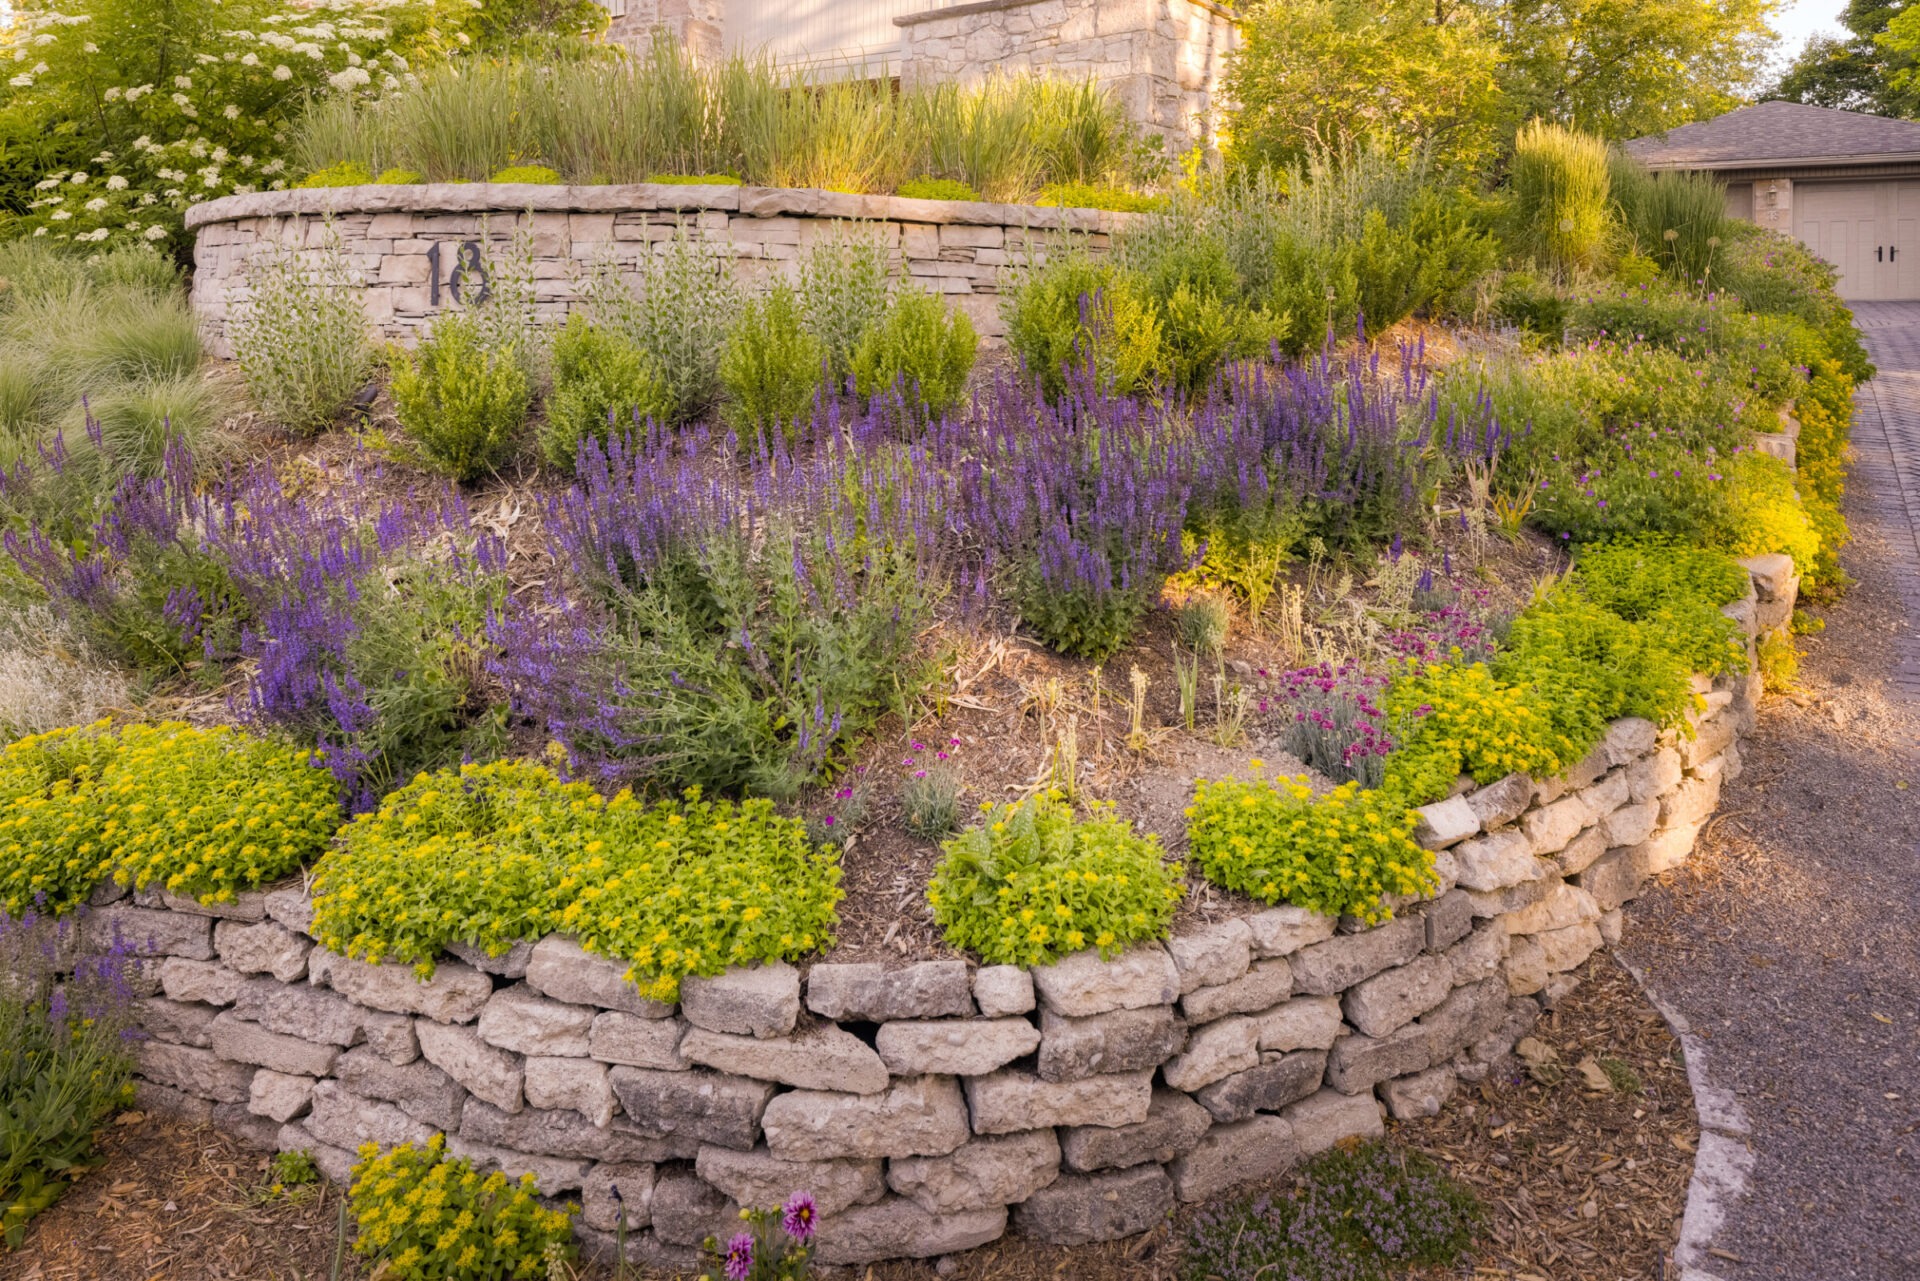 A terraced garden with stone walls featuring purple and yellow flowers, lush greenery, next to a driveway leading to a garage.